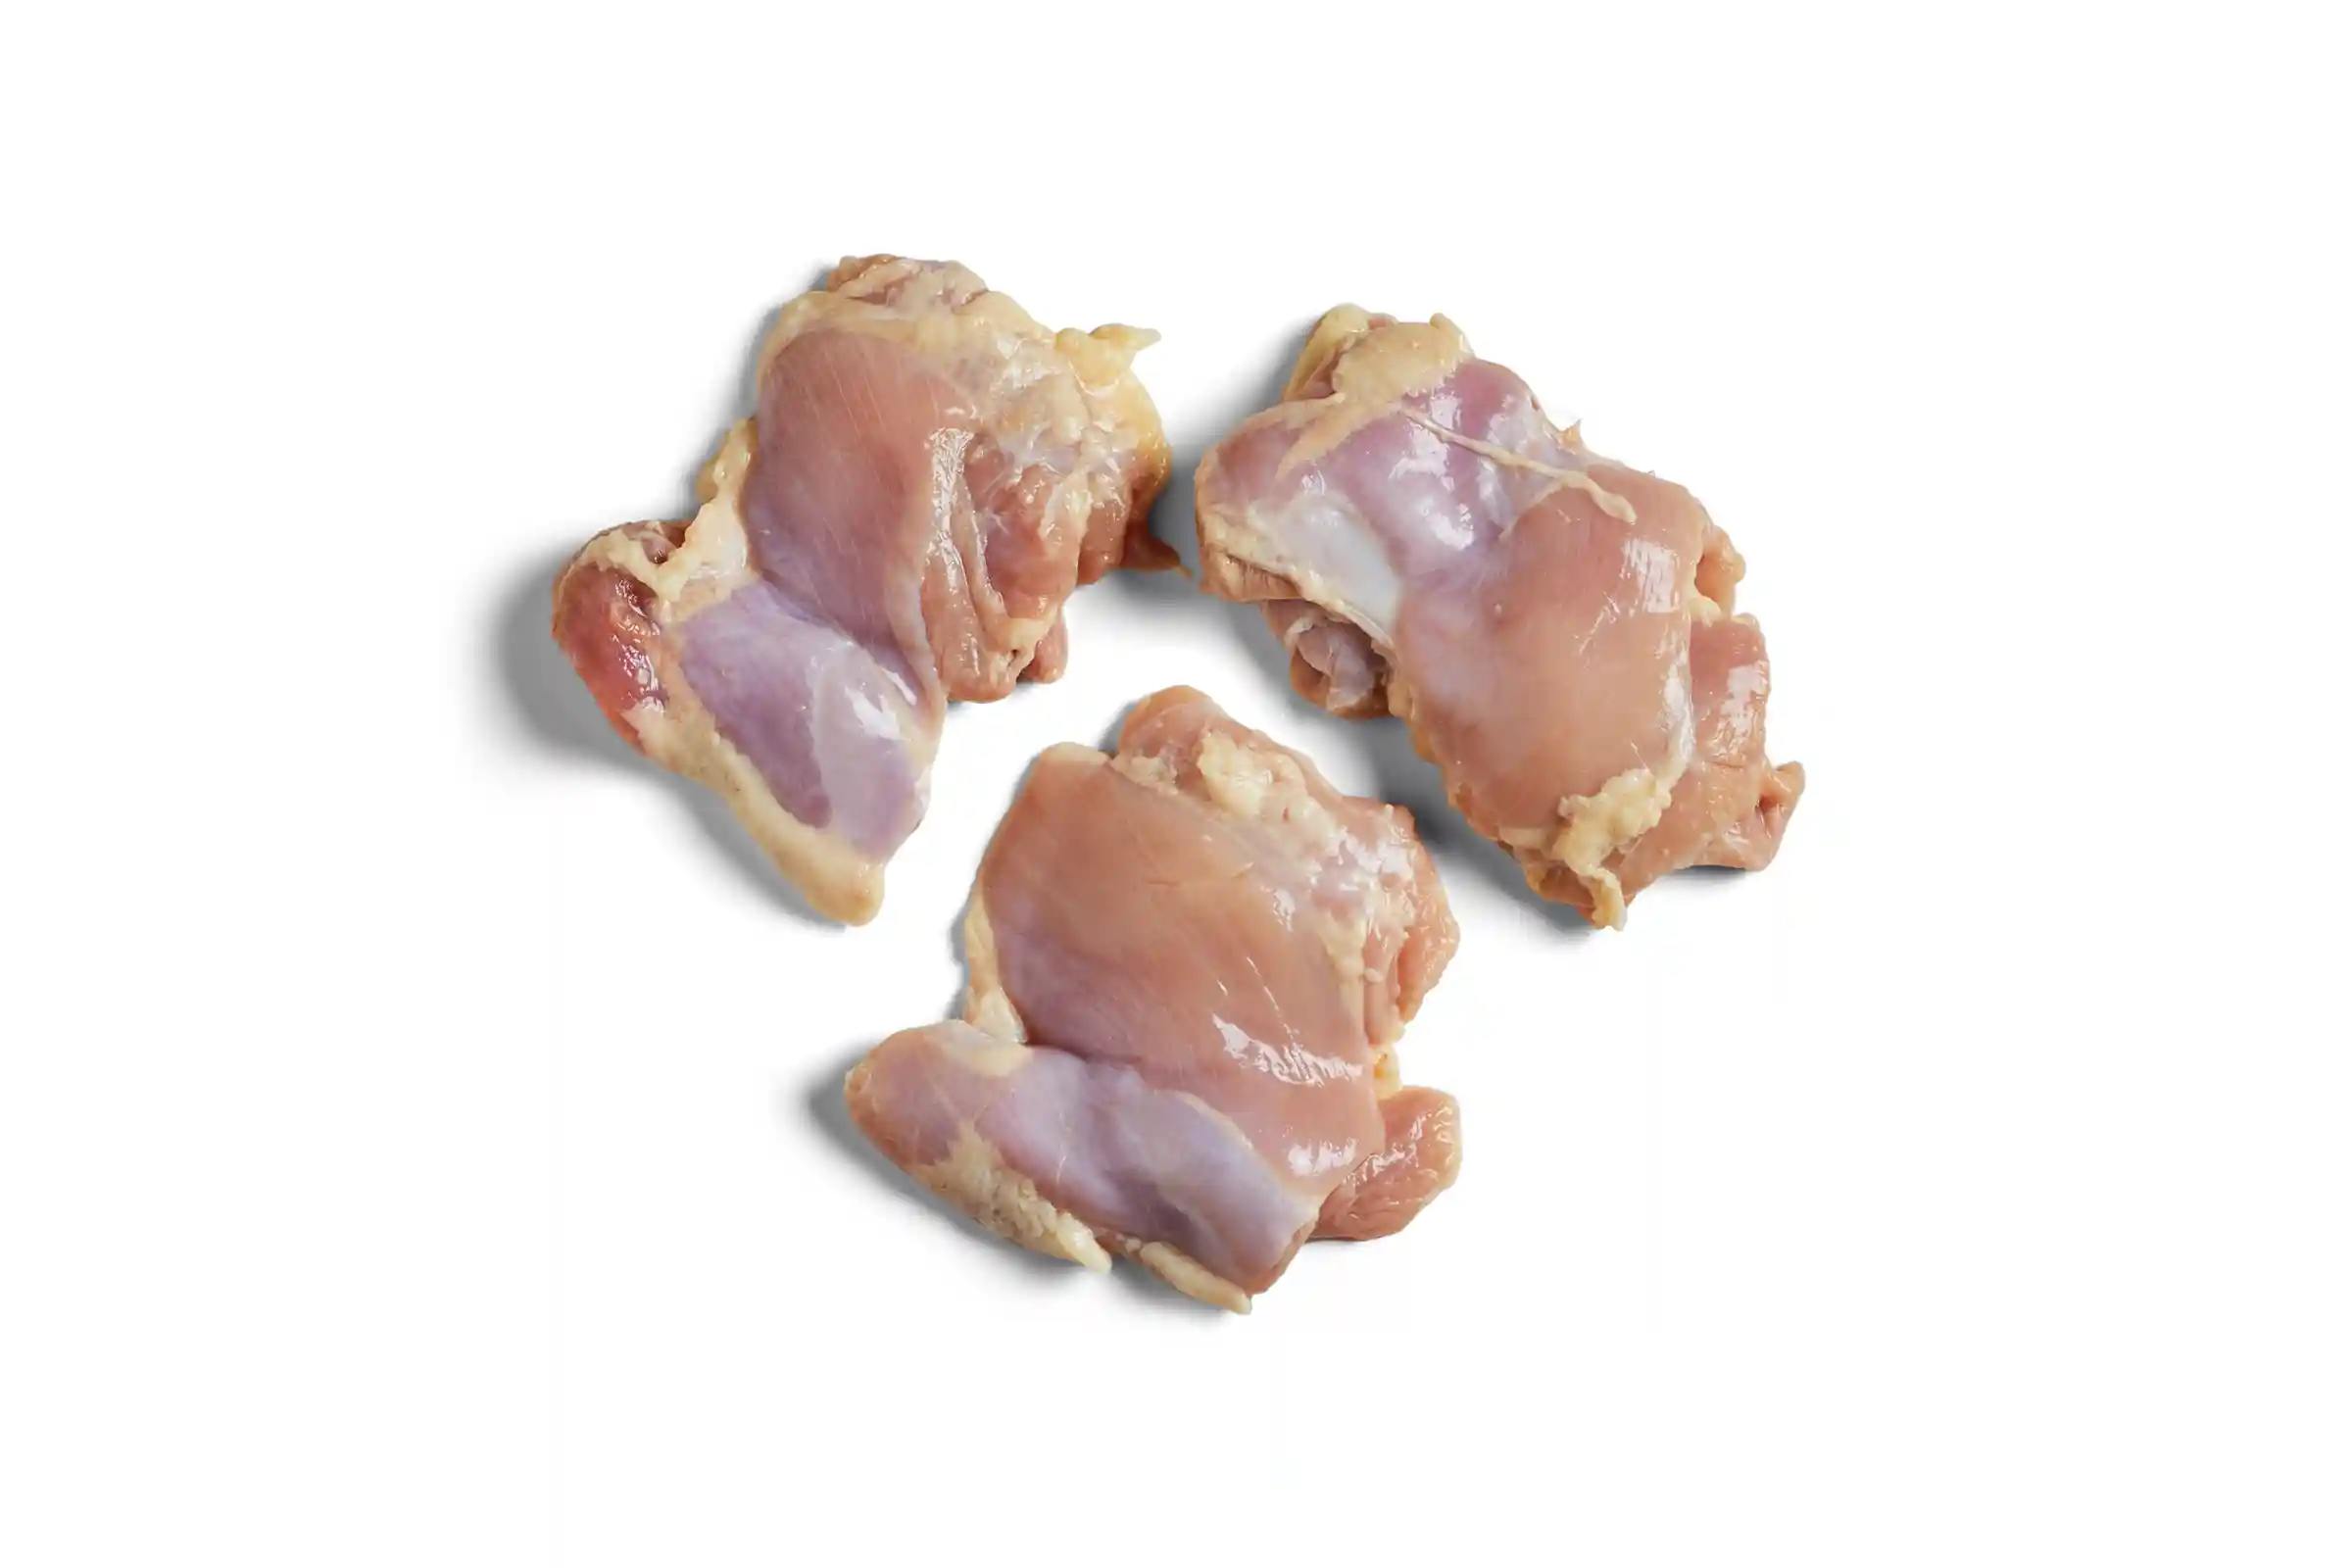 Tyson® Uncooked Unbreaded Boneless Skinless Chicken Thigh Filets_image_11